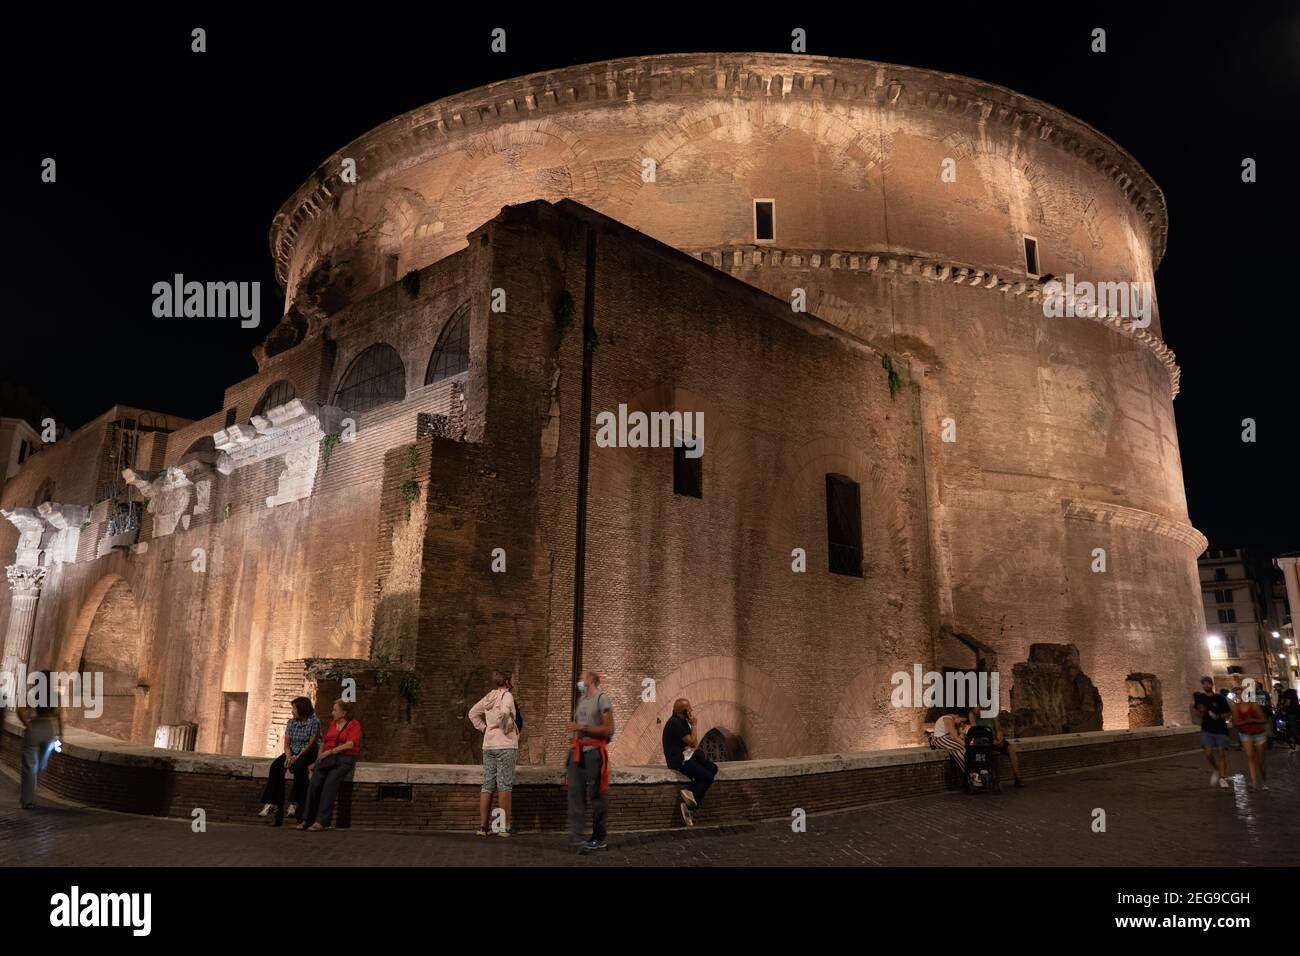 Pantheon at night, an ancient Roman temple (113 to 125 AD) in Rome, Italy Stock Photo